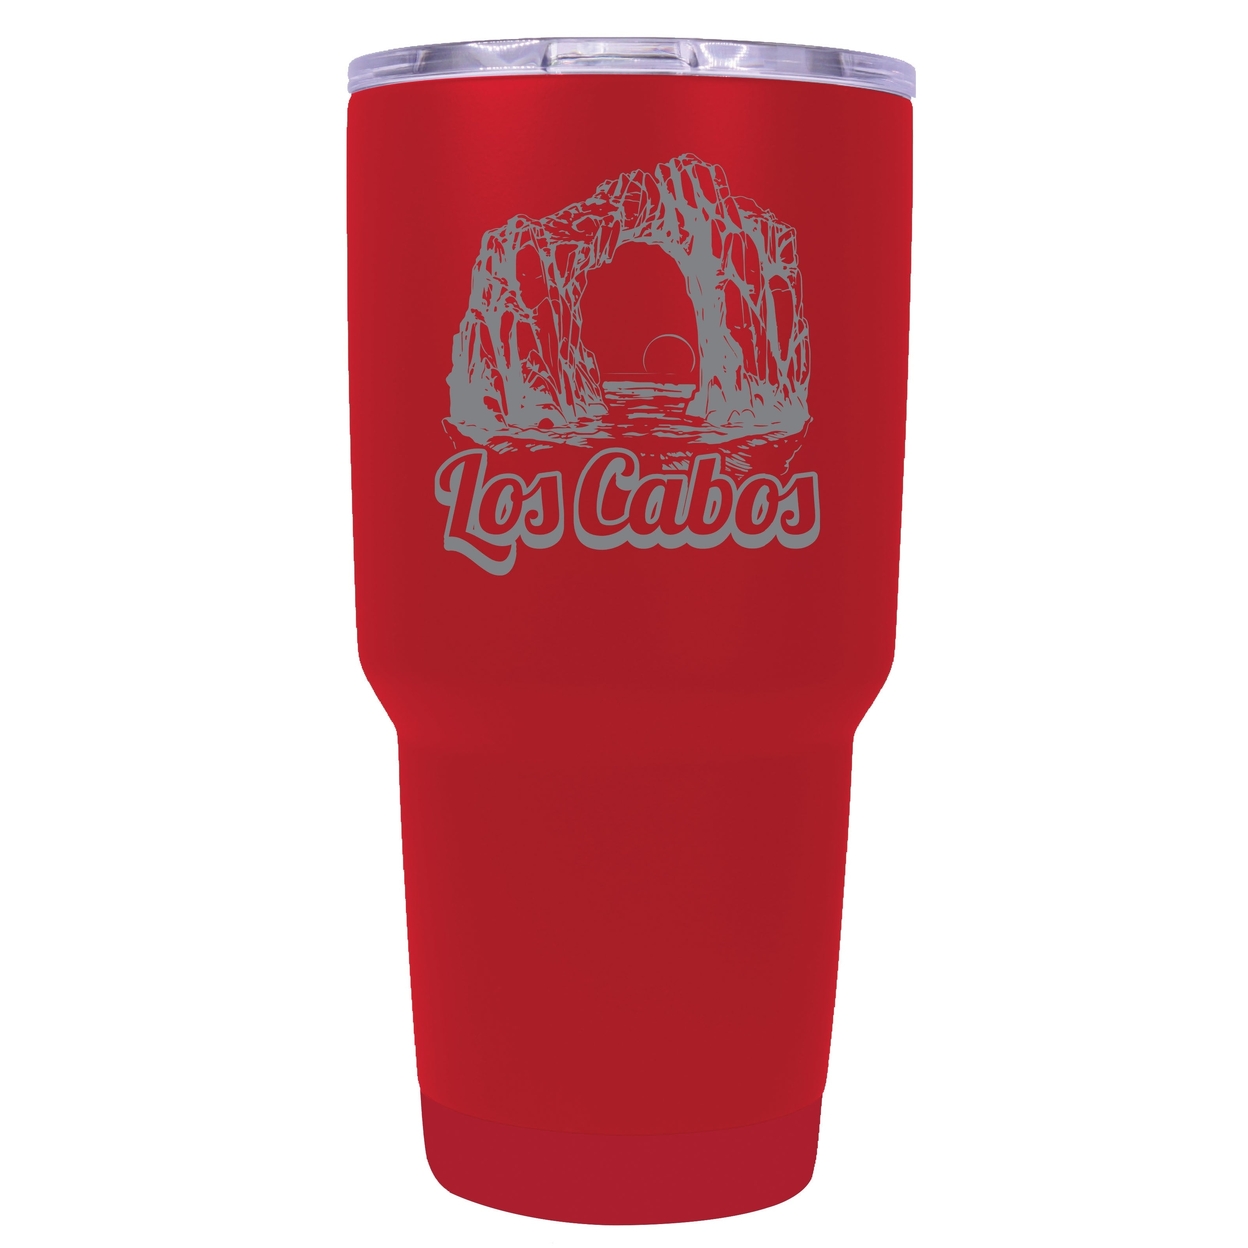 Los Cabos Mexico Souvenir 24 Oz Engraved Insulated Stainless Steel Tumbler - Coral,,4-Pack